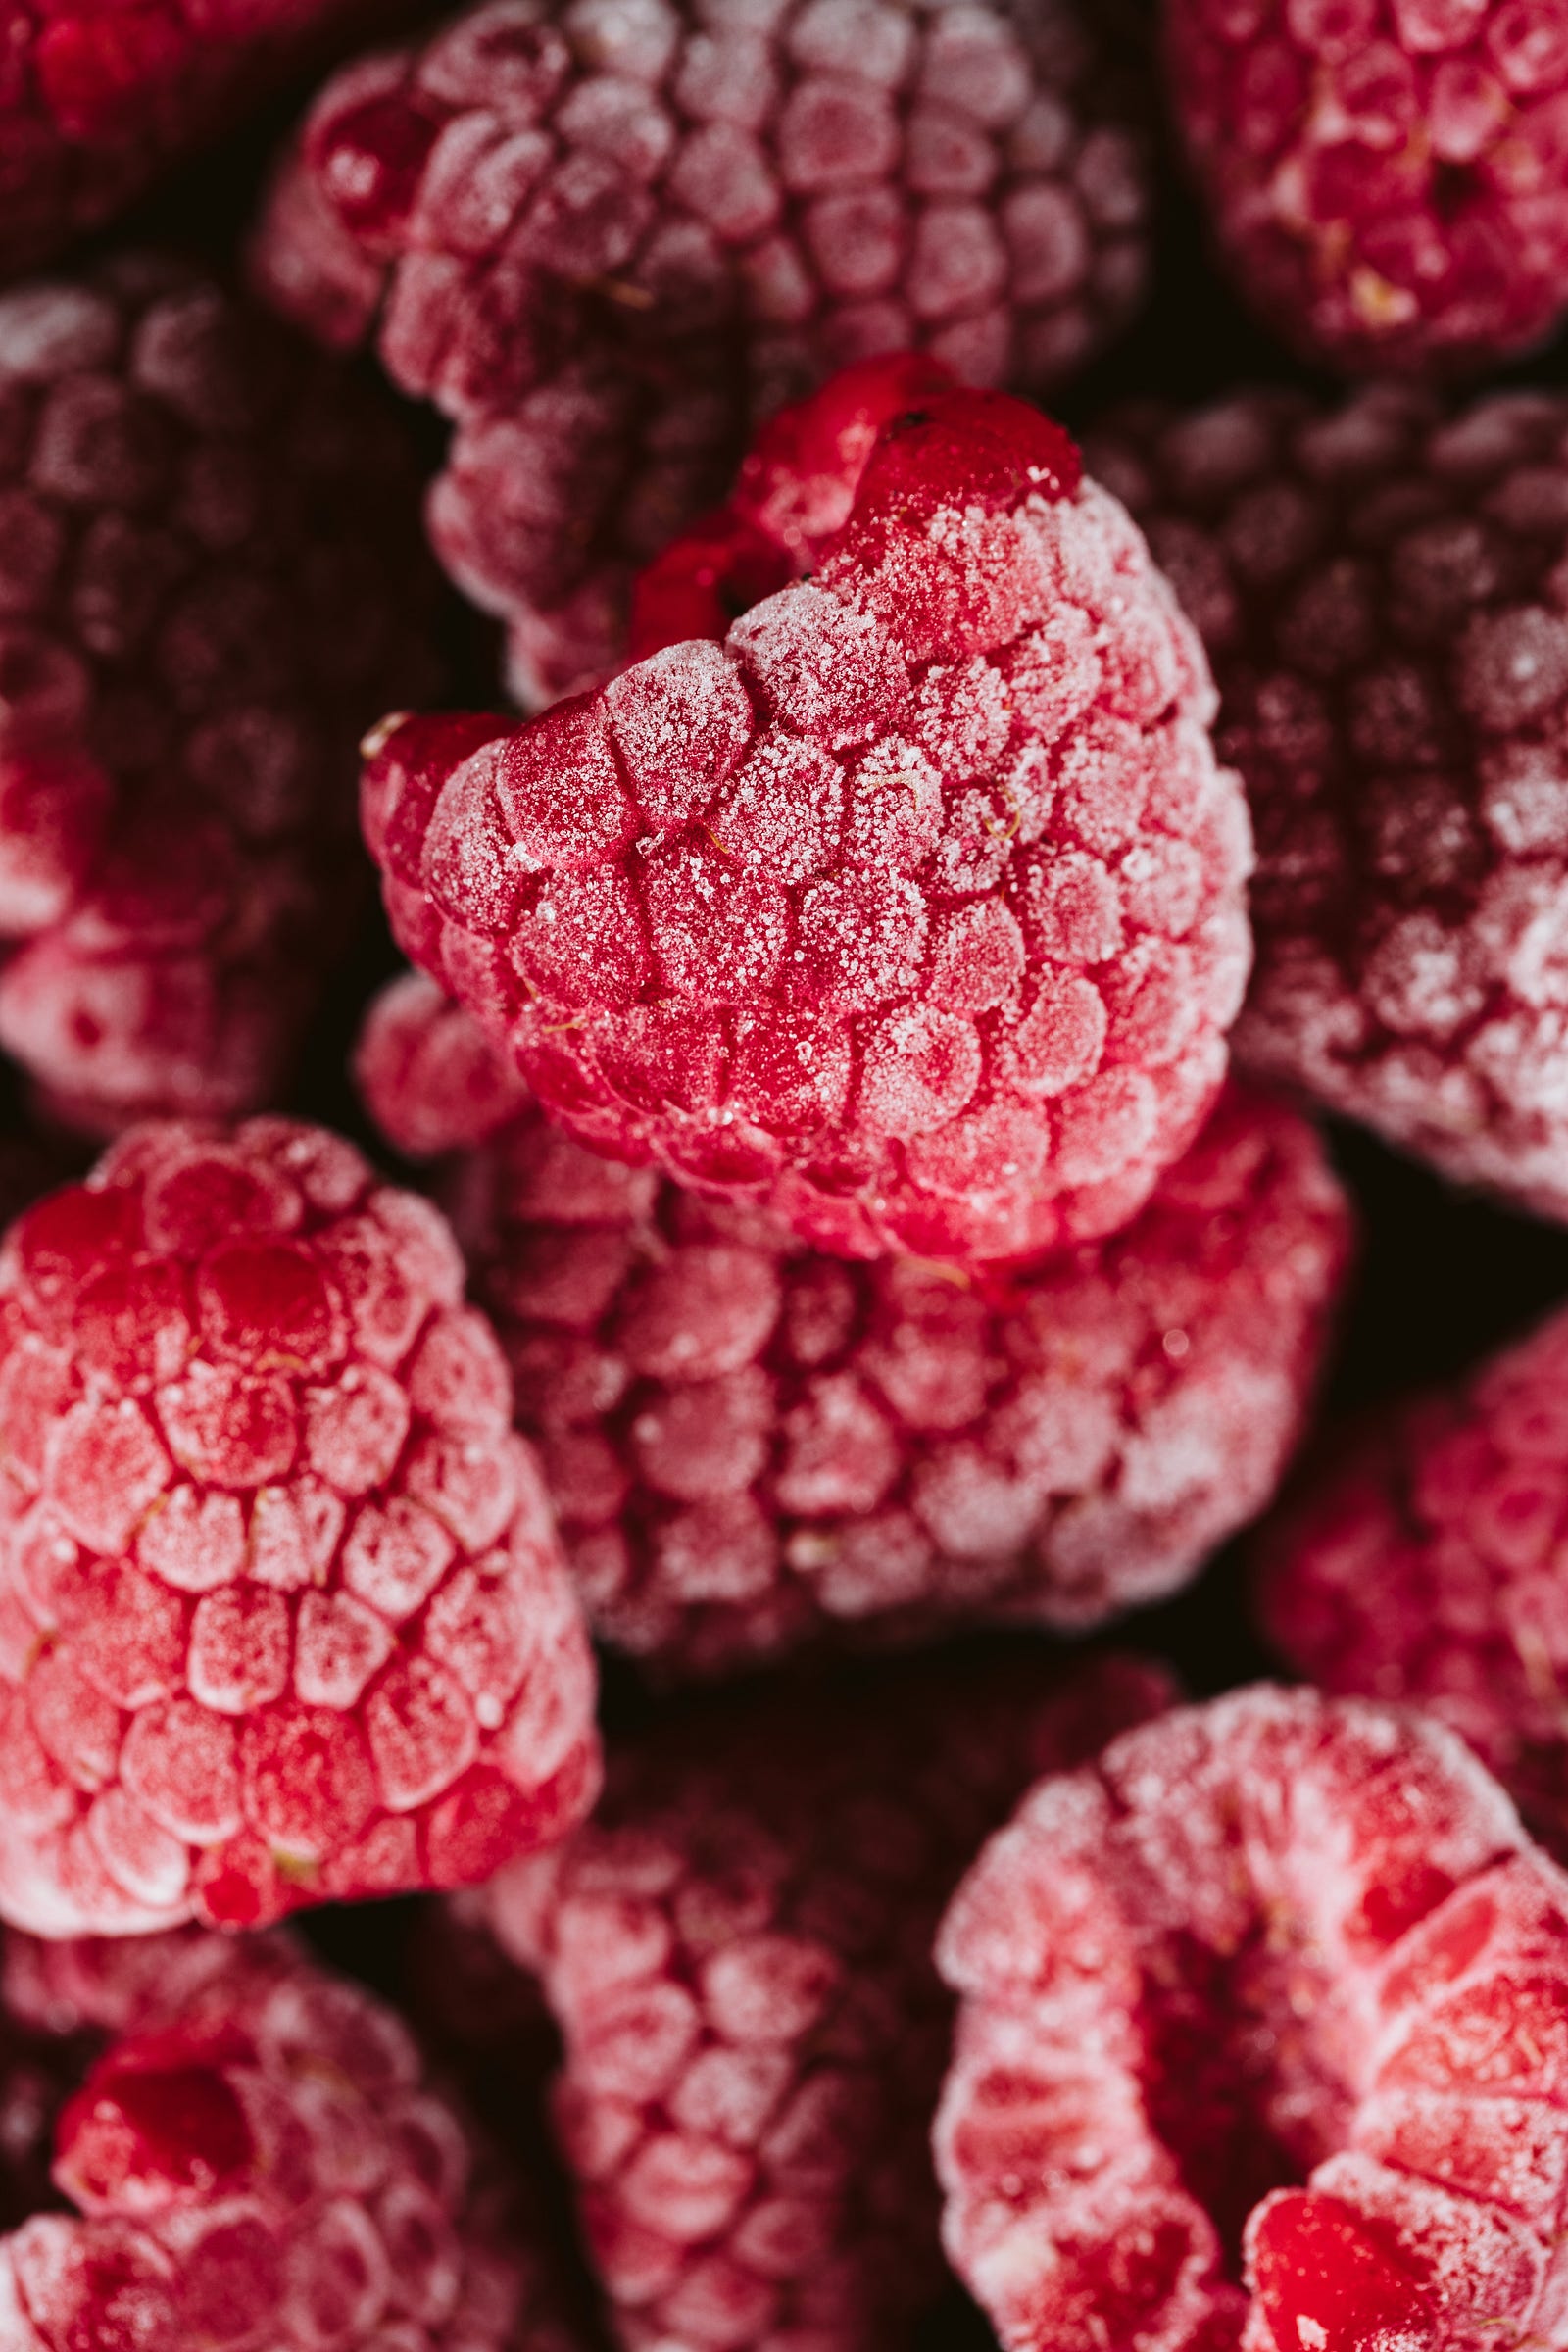 Frozen raspberries in extreme closeup. Did you know that frozen fruits sometimes have more nutrients than fresh? For example, this may be the case if the frozen variety had been picked at peak ripeness.